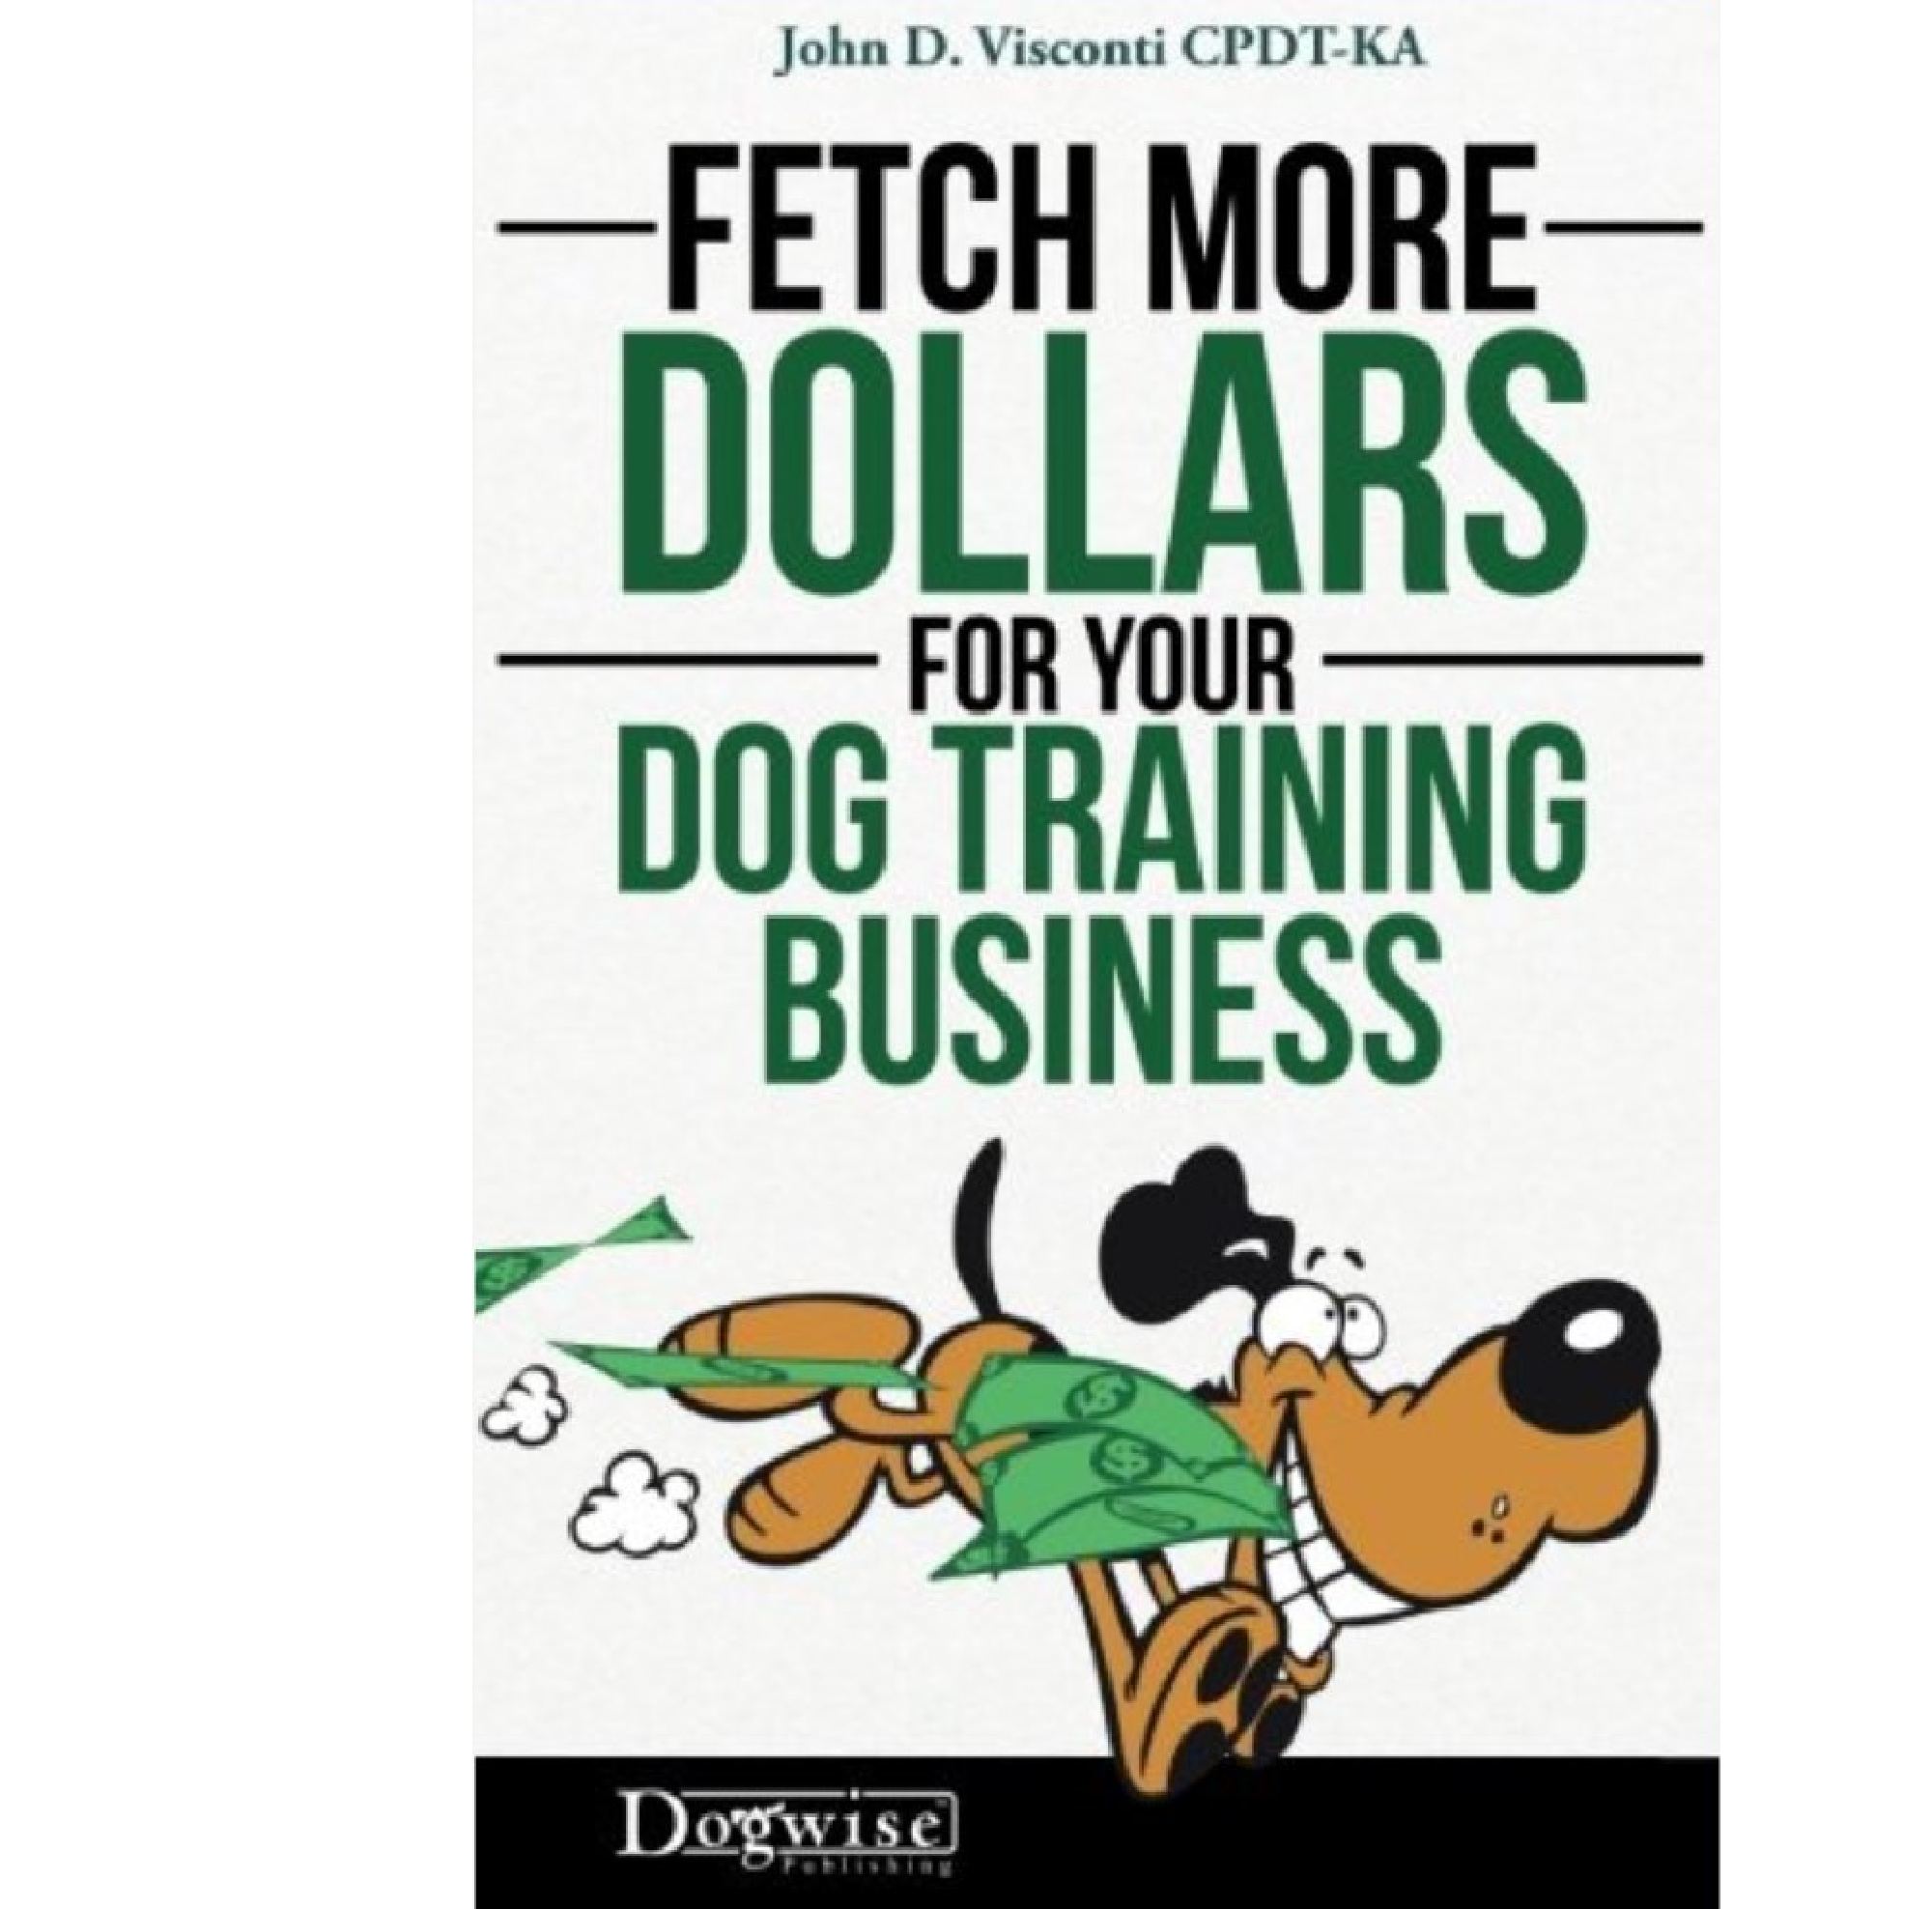 Fetch More Dollars for Your Dog Training Business